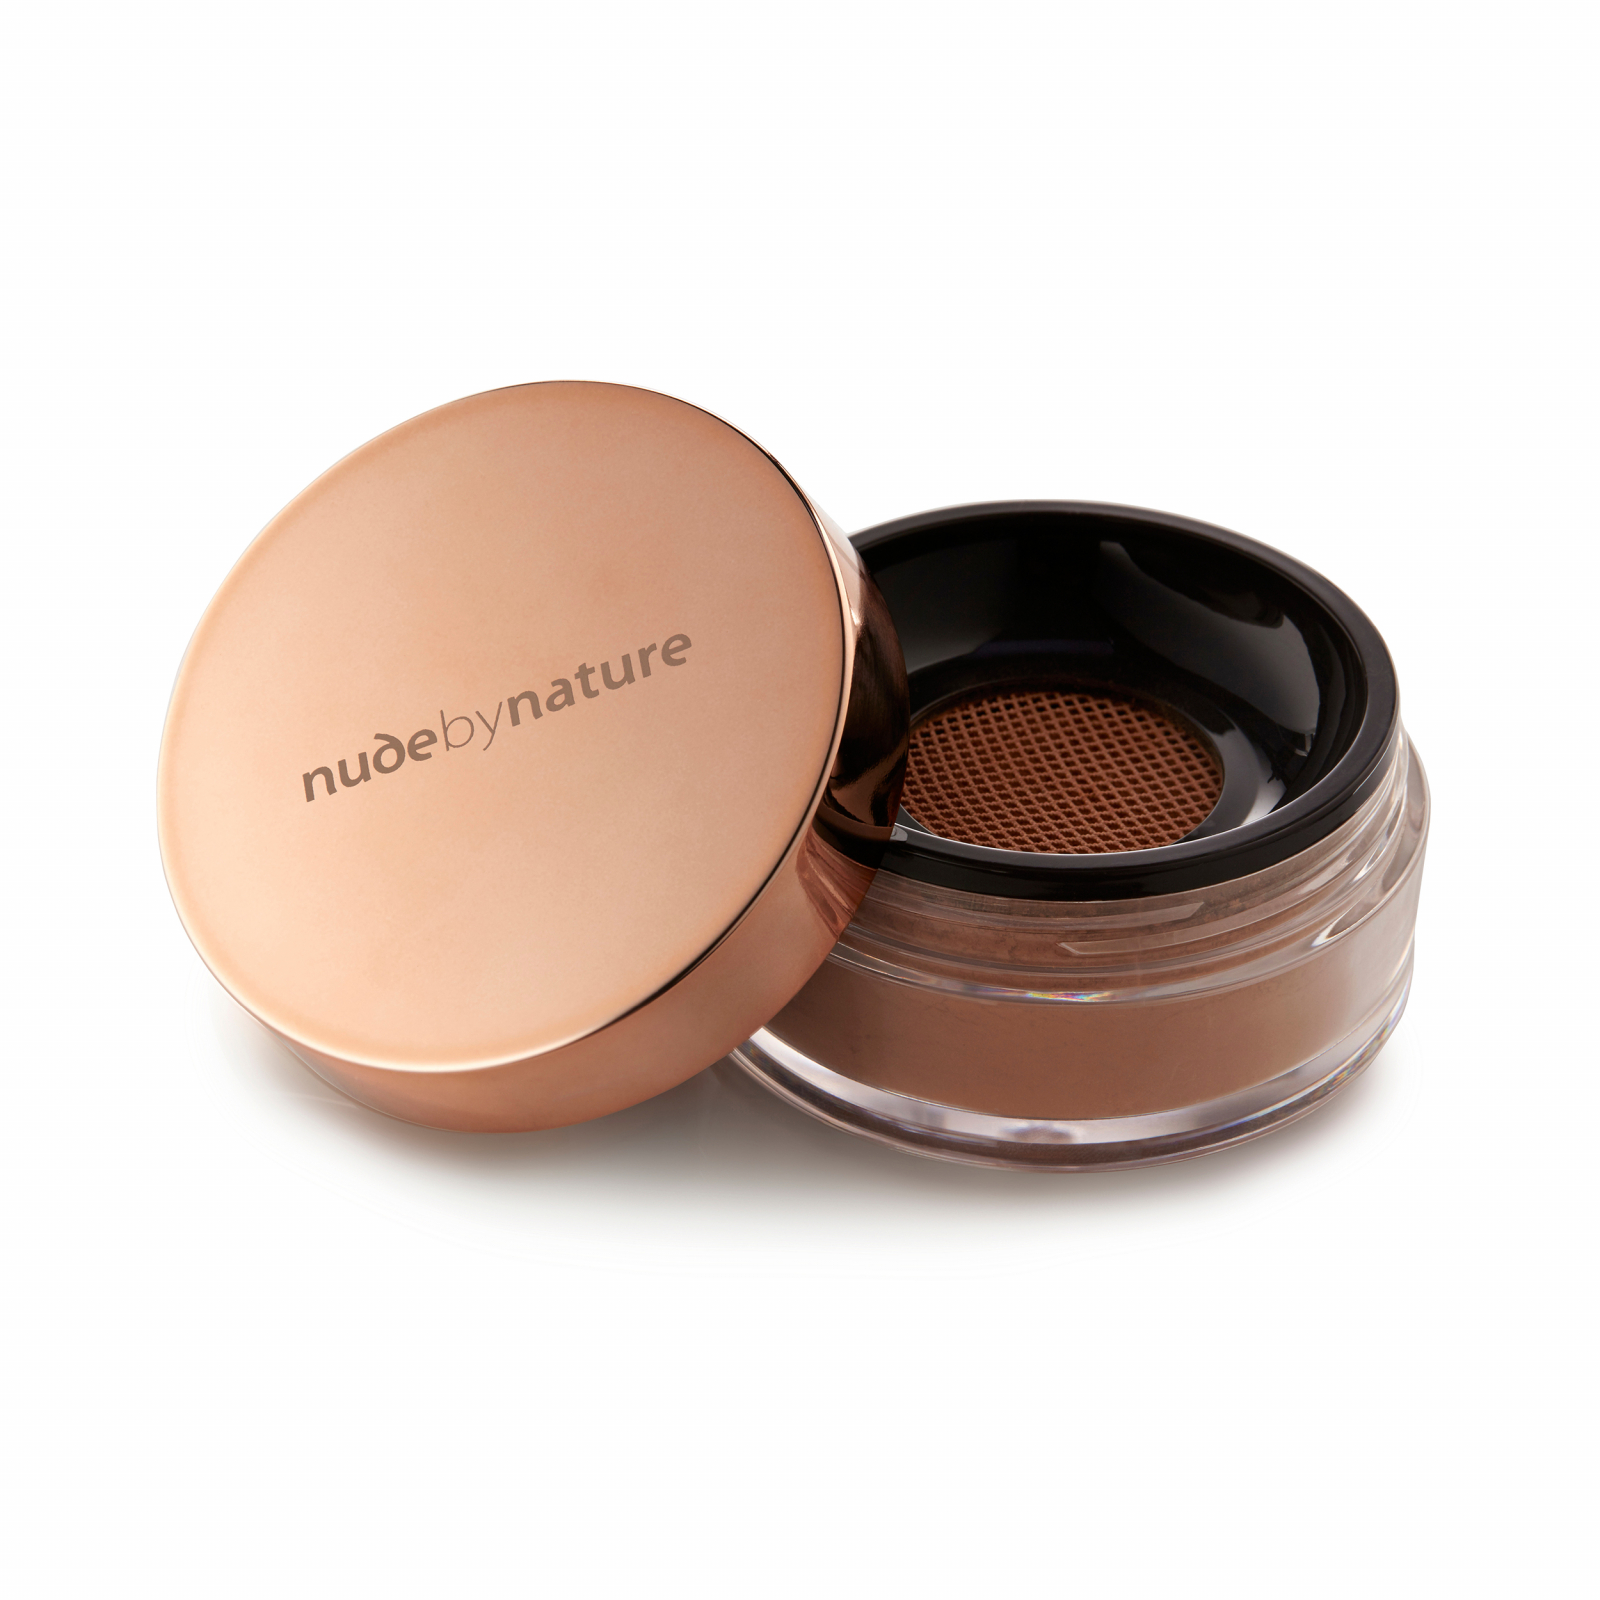 Nude by Nature Mineral Bronzer, 99 zł